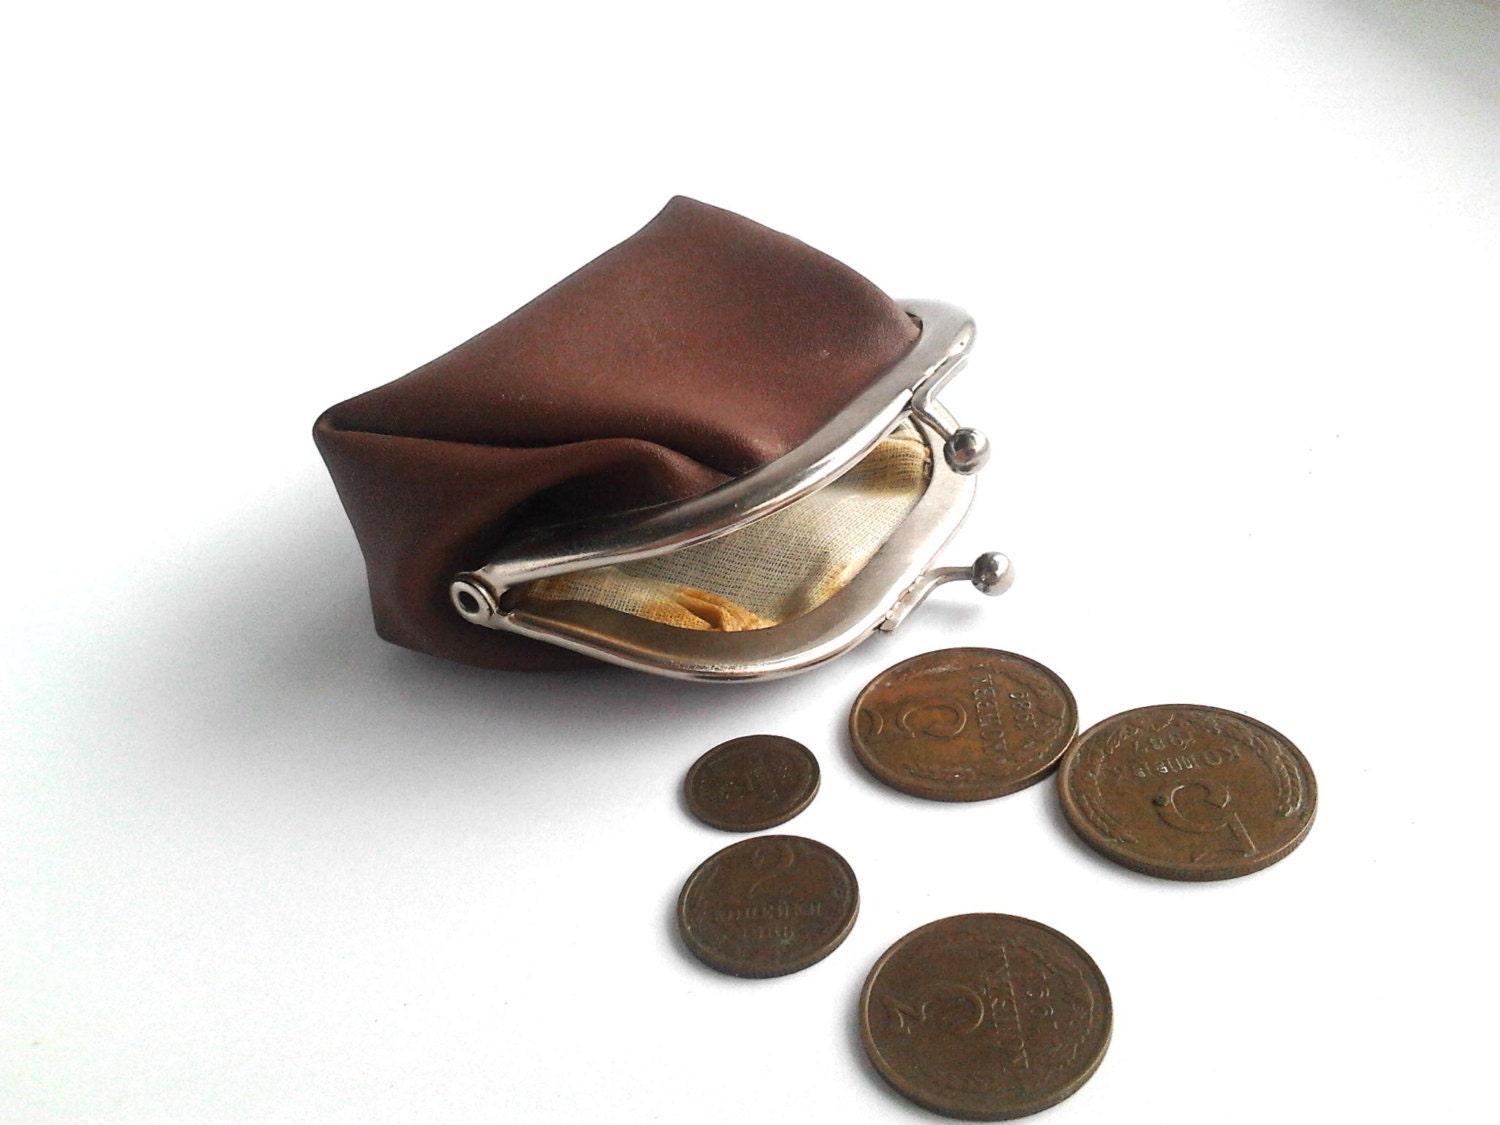 Vintage Coin Purse Change Purse Small Brown Coin by FoundinUSSR